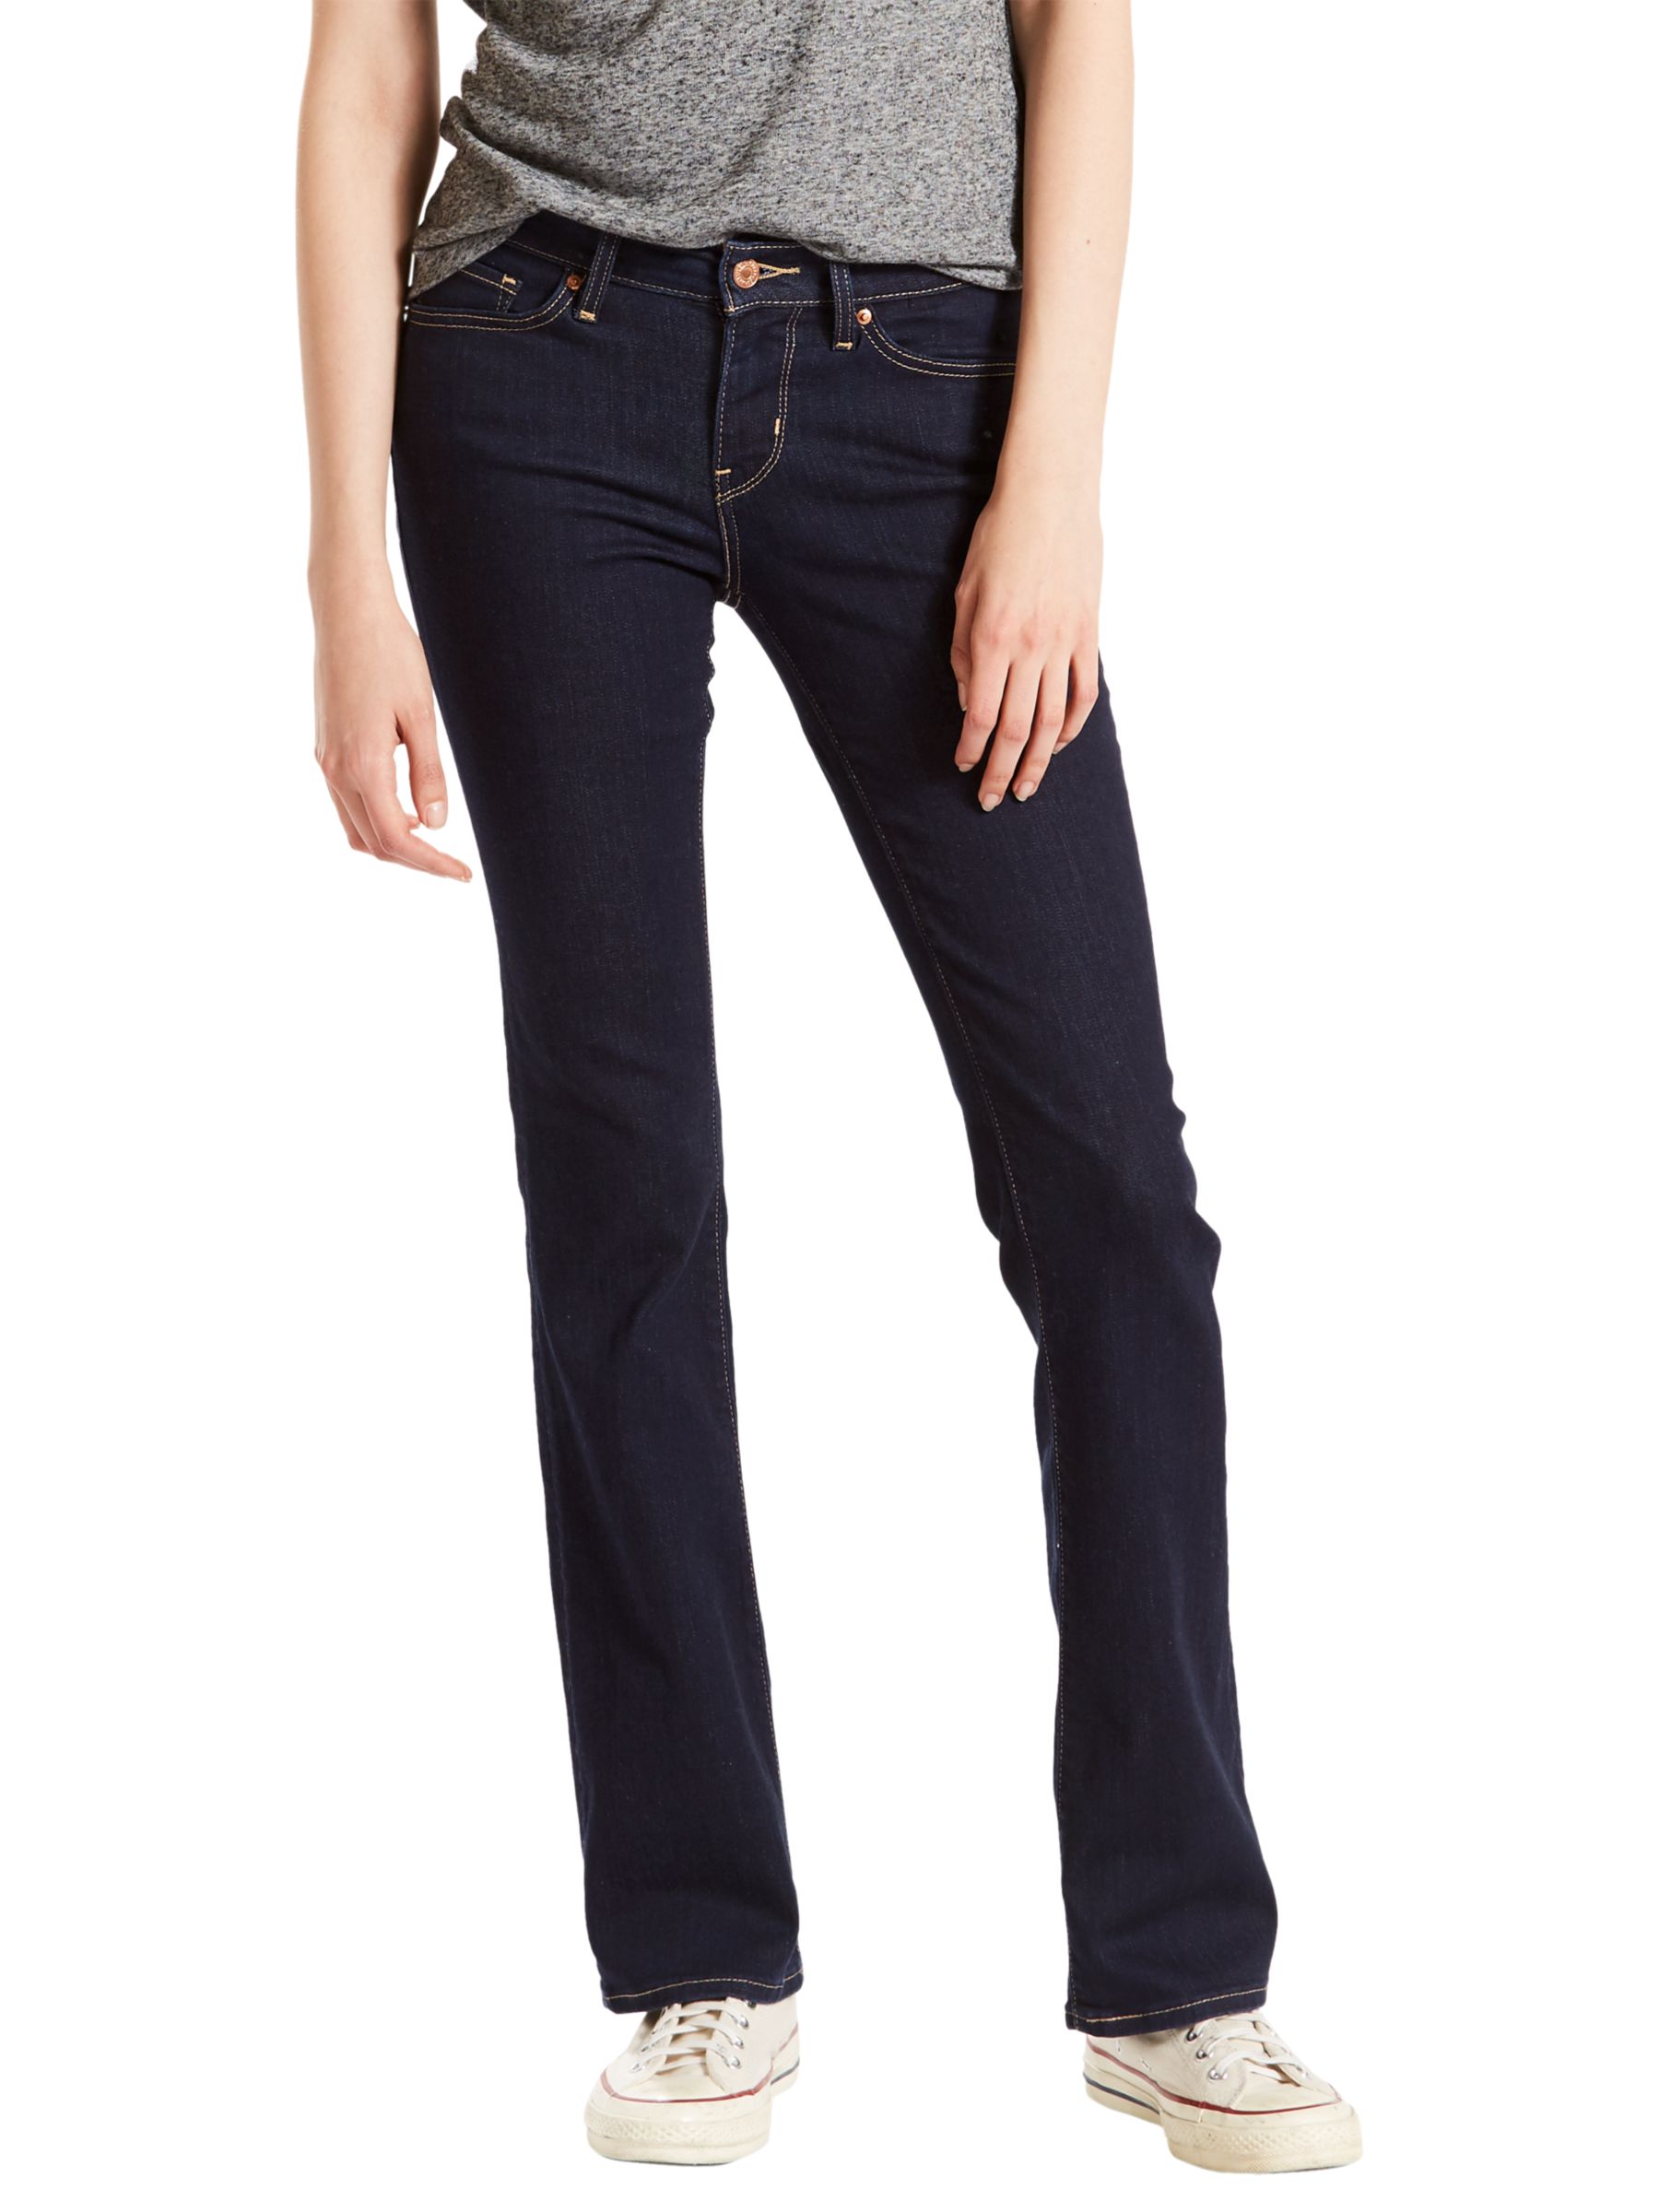 levi's 715 bootcut womens jeans